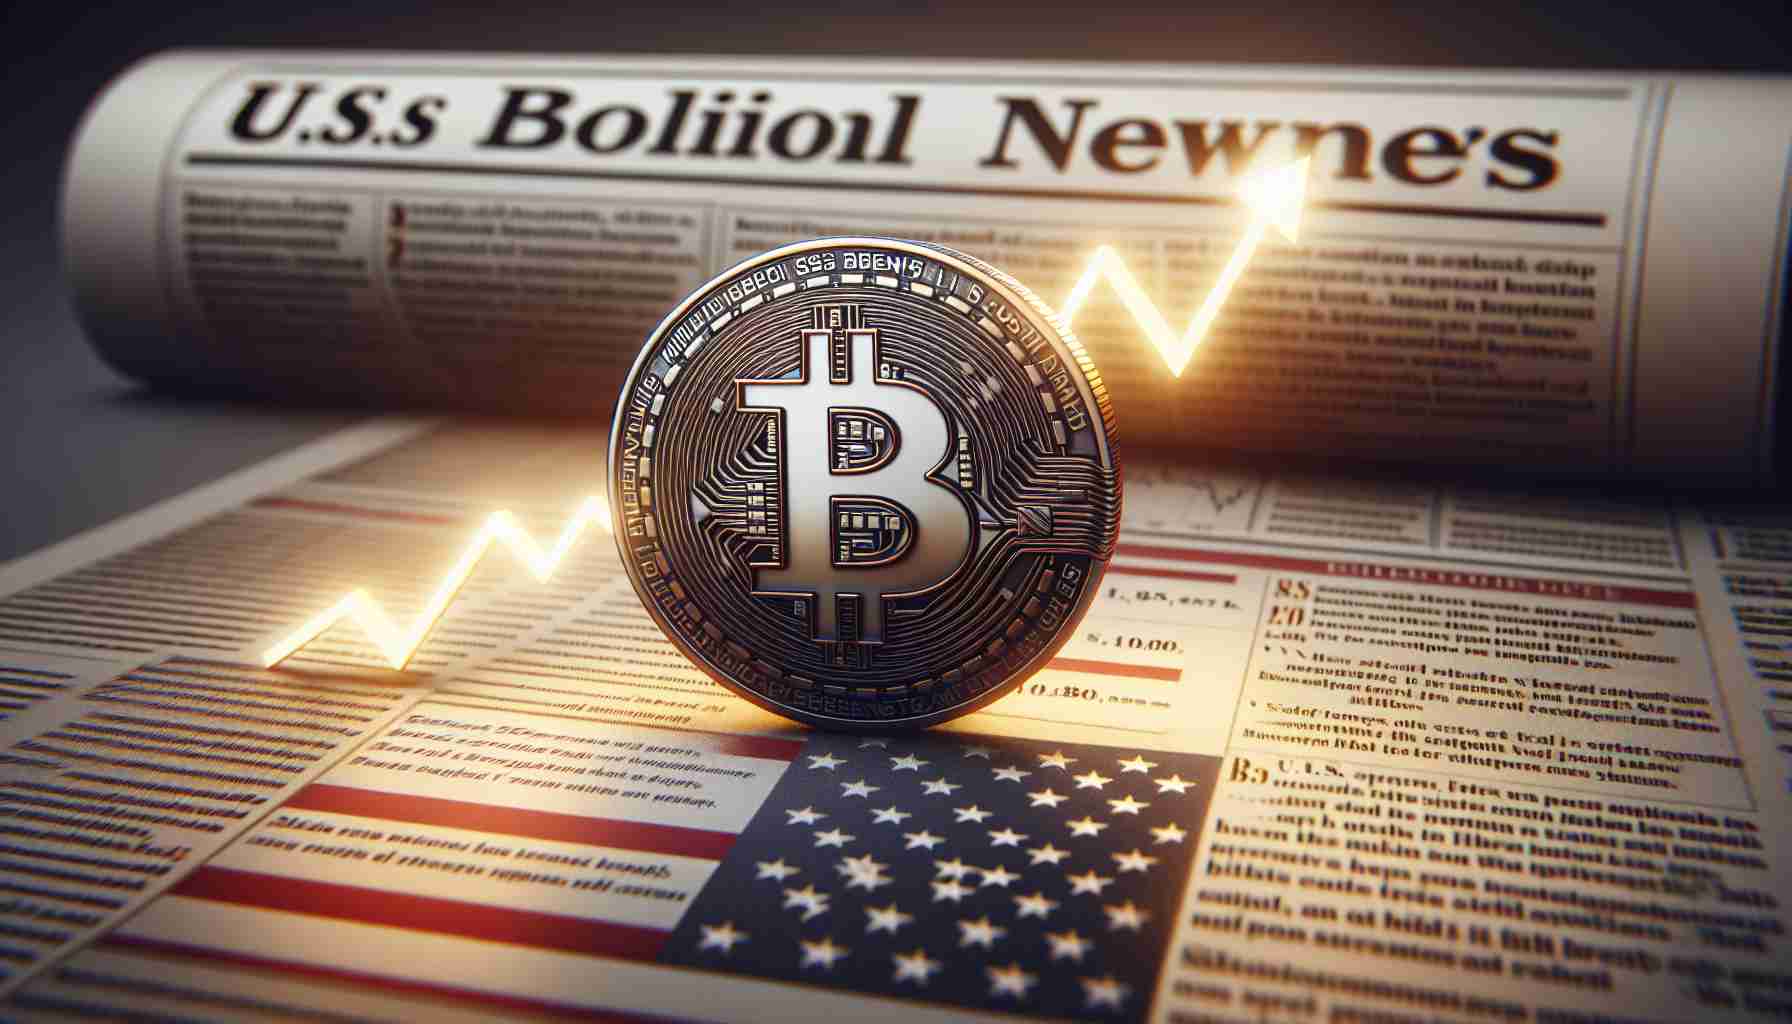 Realistic high-definition image of a symbolic representation of Bitcoin experiencing a sudden increase after a brief dip, all of which is displayed on a digital stock market chart. This is set against a background of a generic newspaper filled with vague wordings stating major news happening in the U.S. without highlighting any specific political figure.